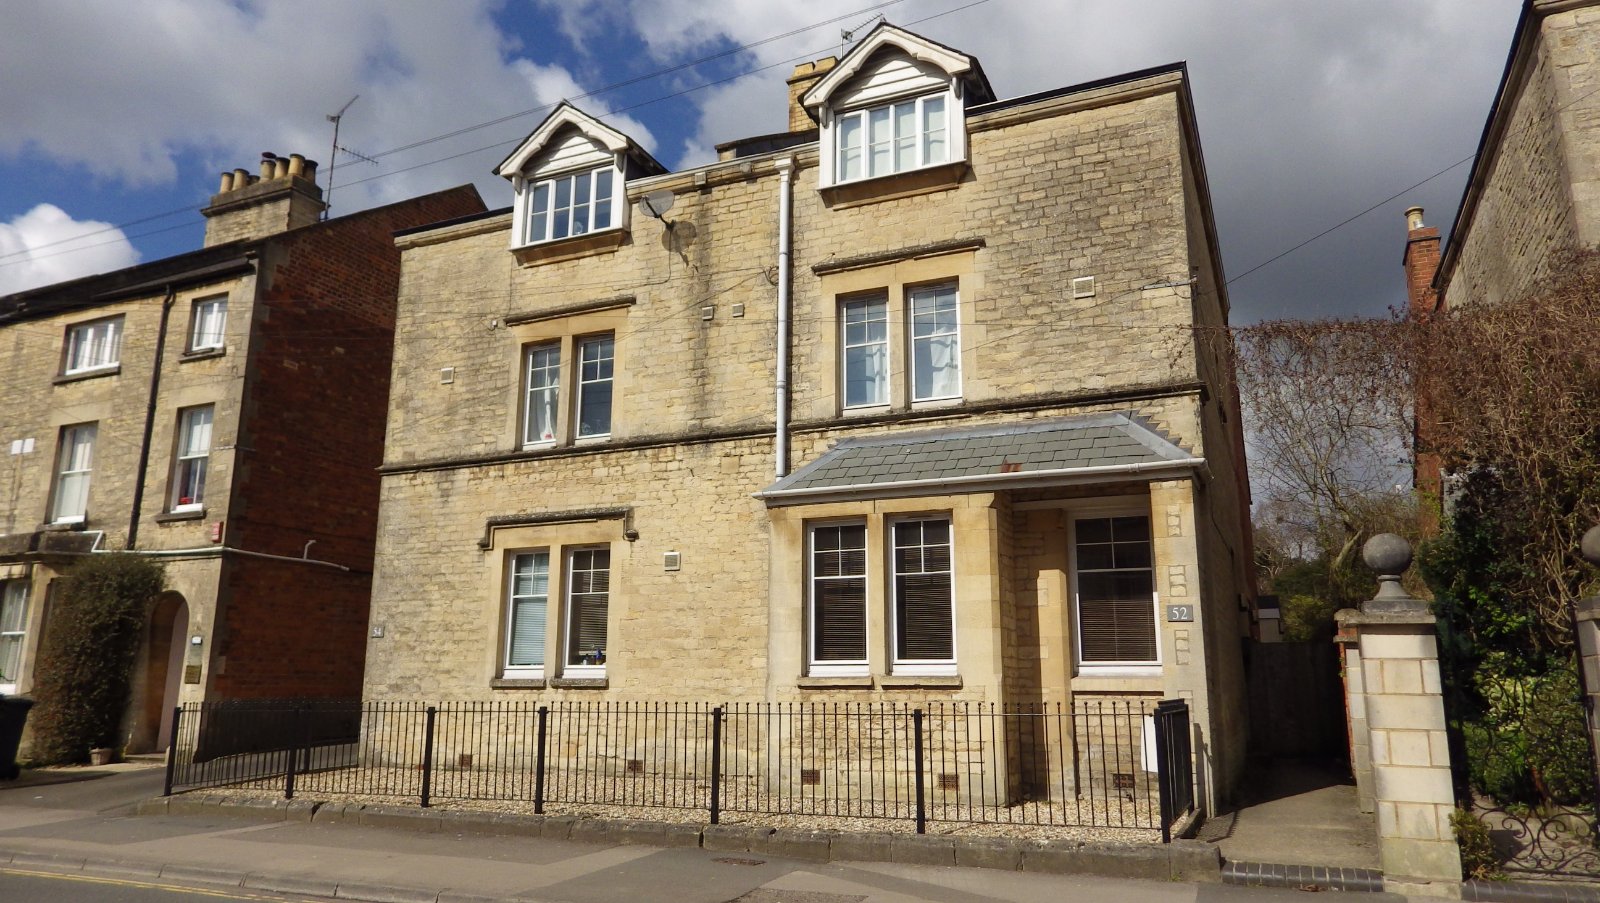 Ashcroft Road, Cirencester, Gloucestershire, GL7